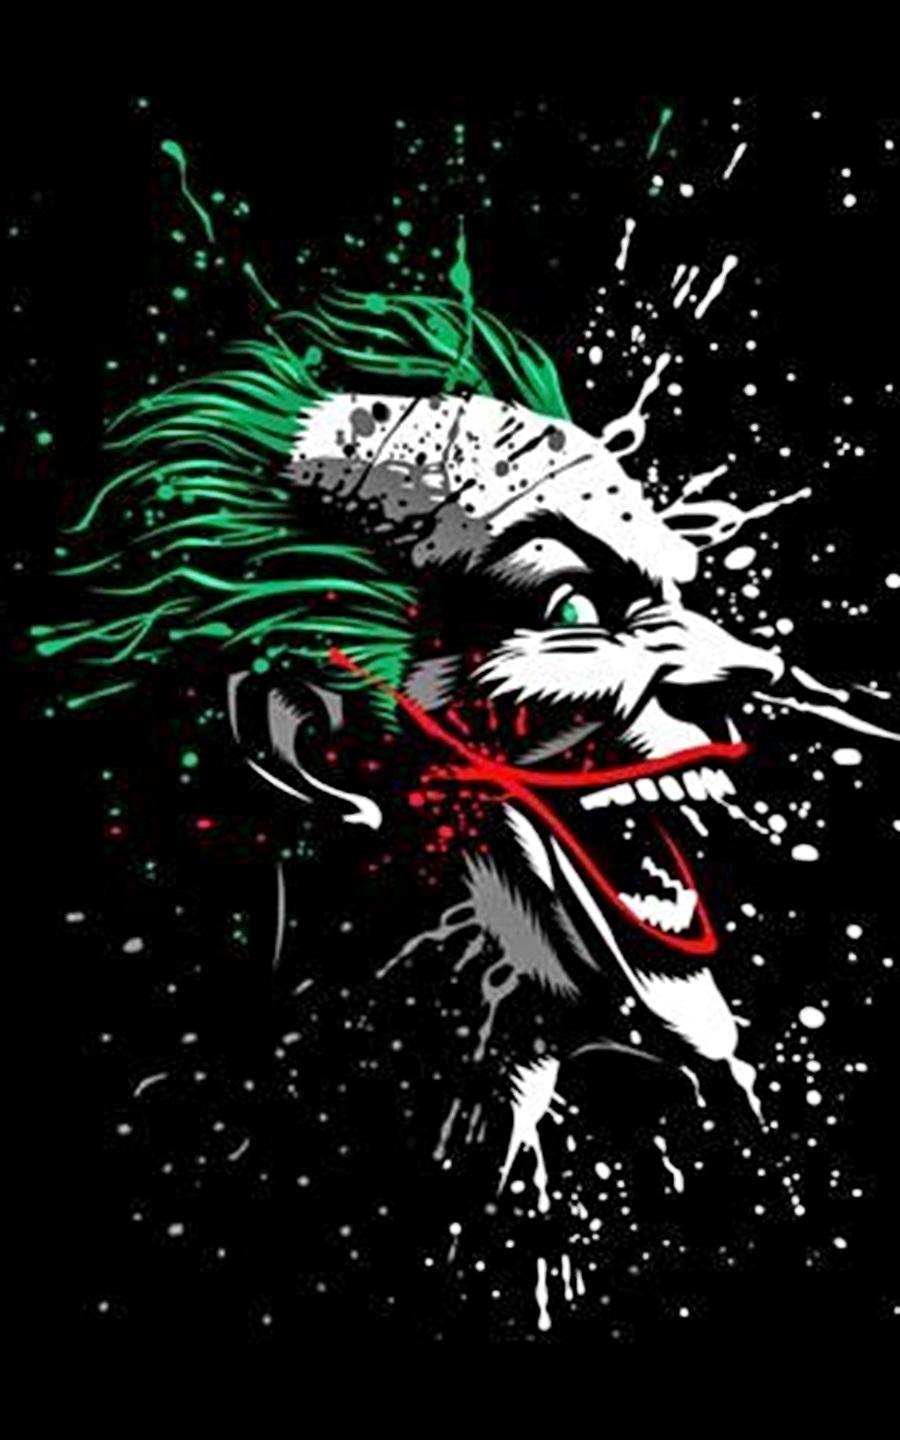  Joker  Wallpaper  HD  for Android APK Download